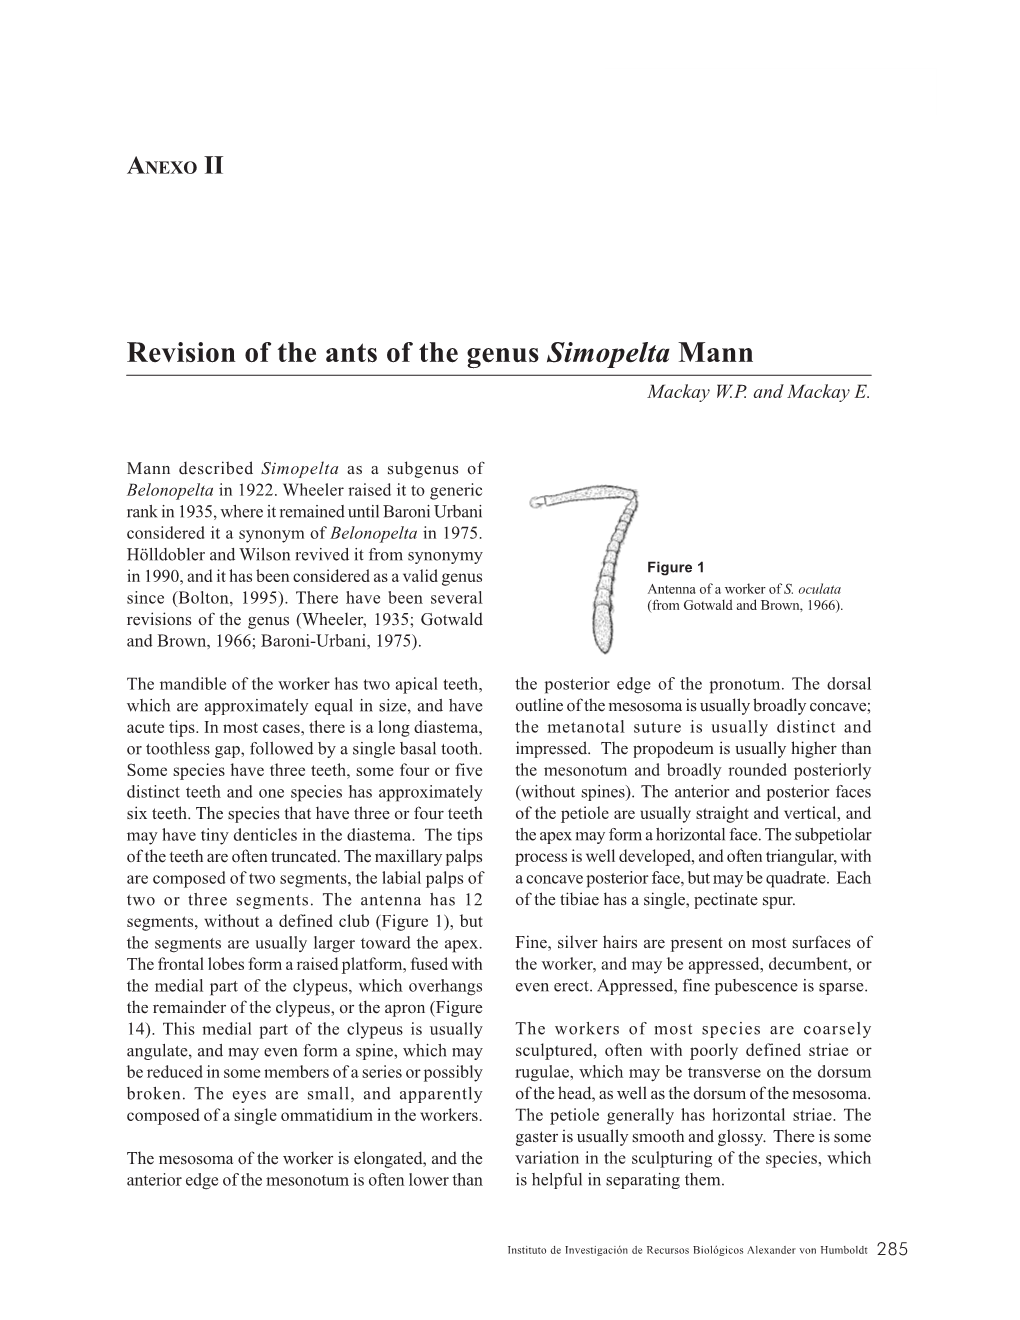 Revision of the Ants of the Genus Simopelta Mann